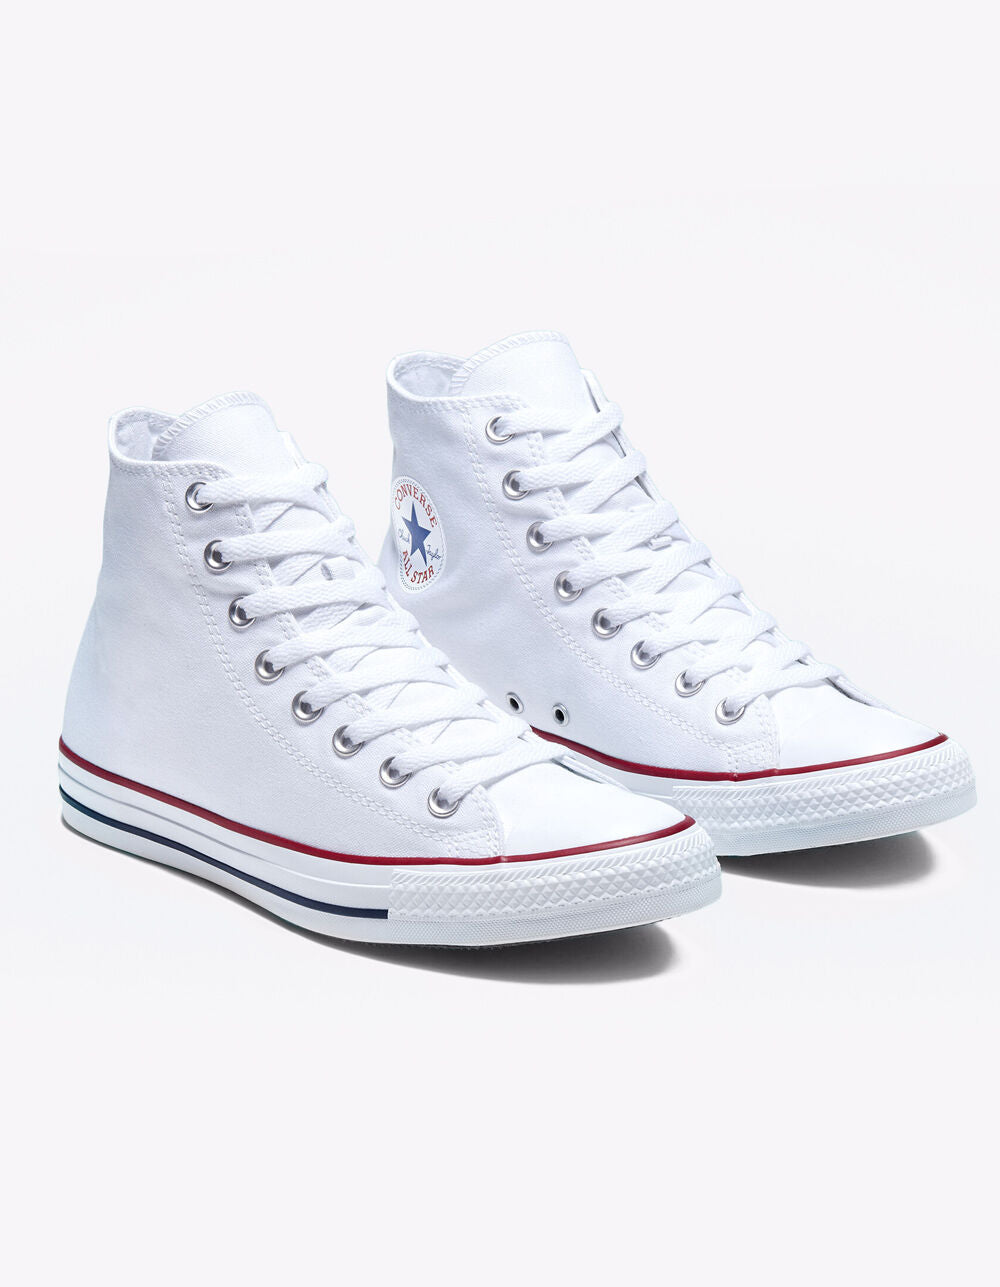 Converse  men Chuck Taylor All Star White High Top Shoes abs151